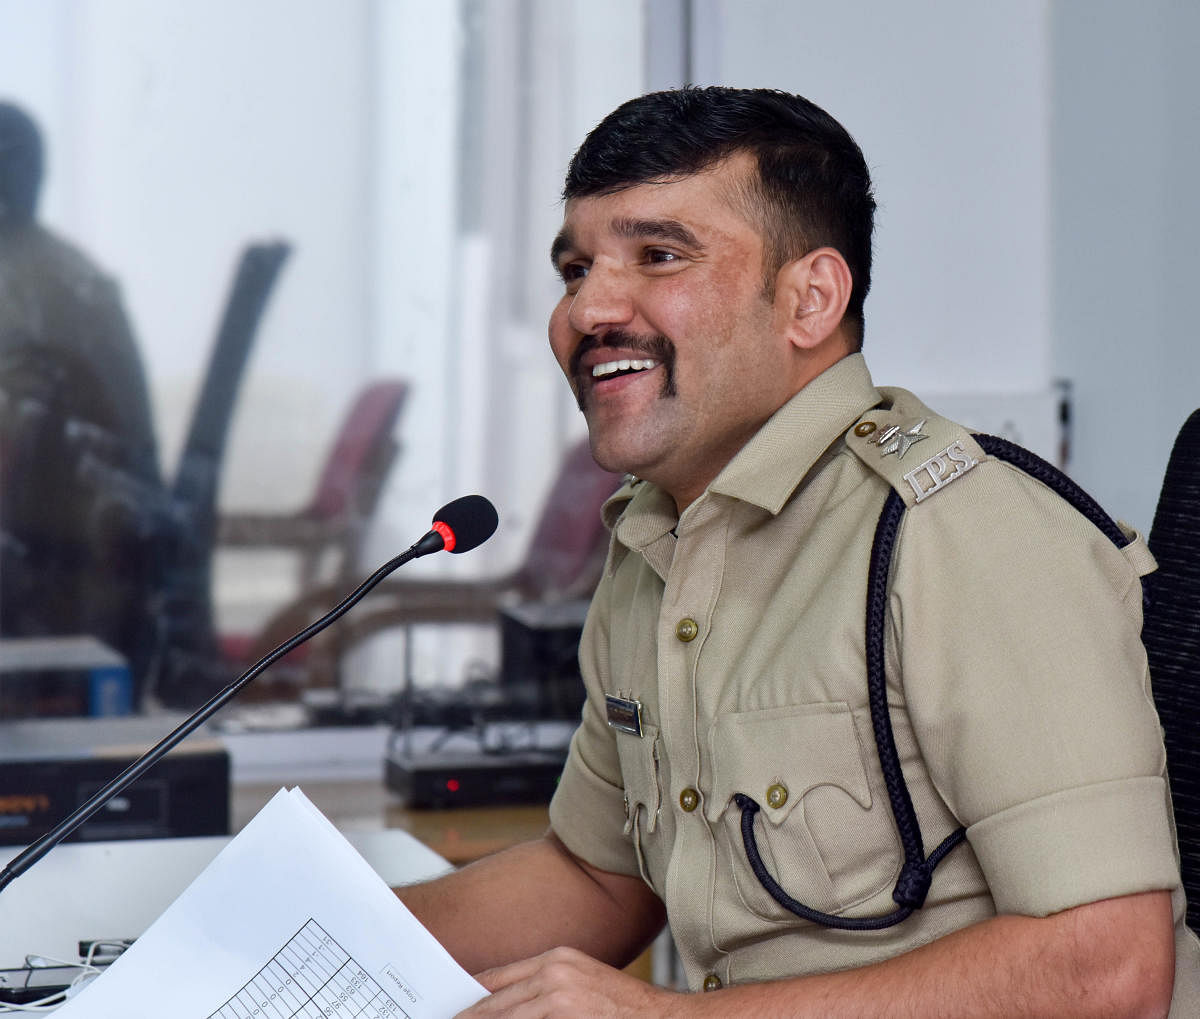 'You need courage as an IPS officer, the rest falls in line'